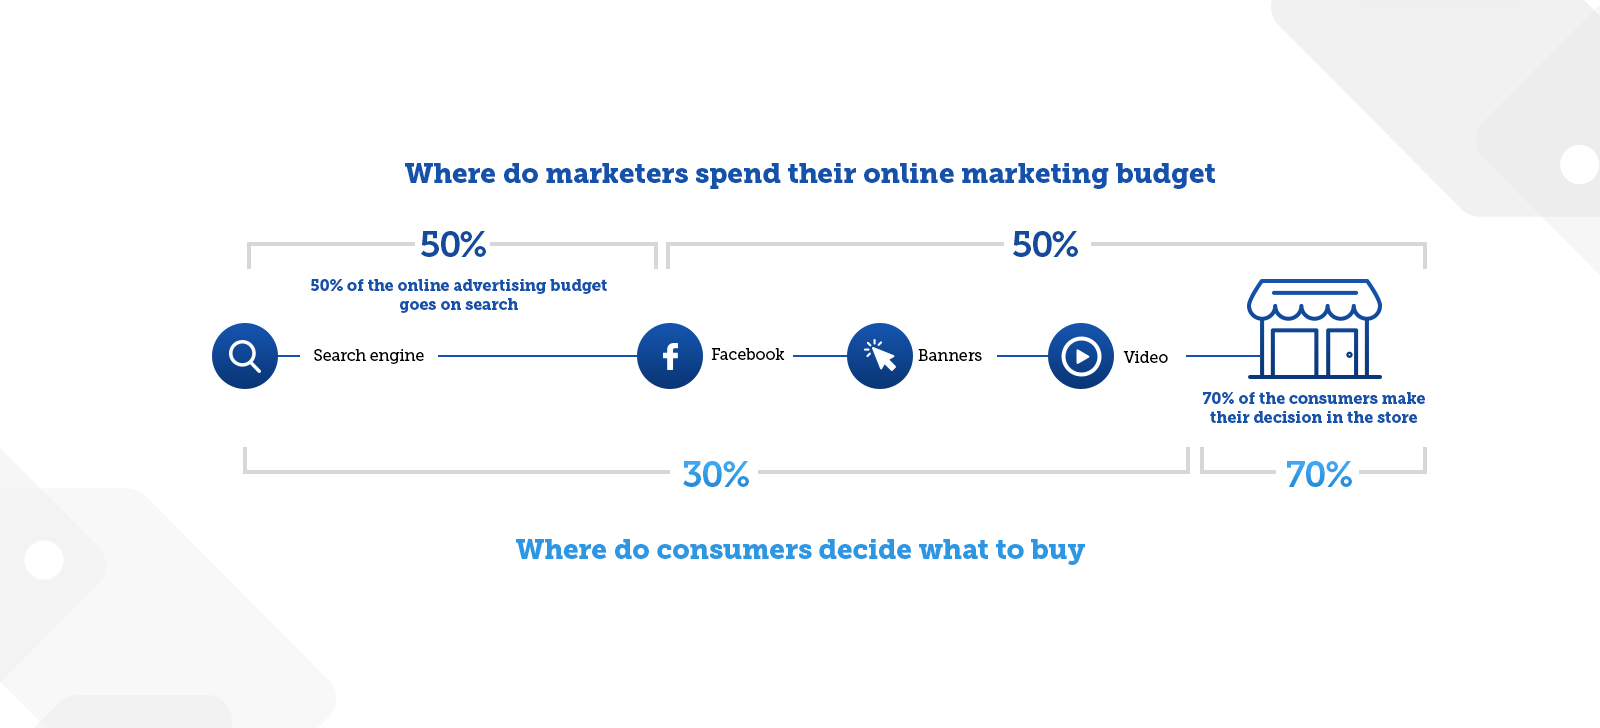 Nearly half of digital marketing budgets is spent on search